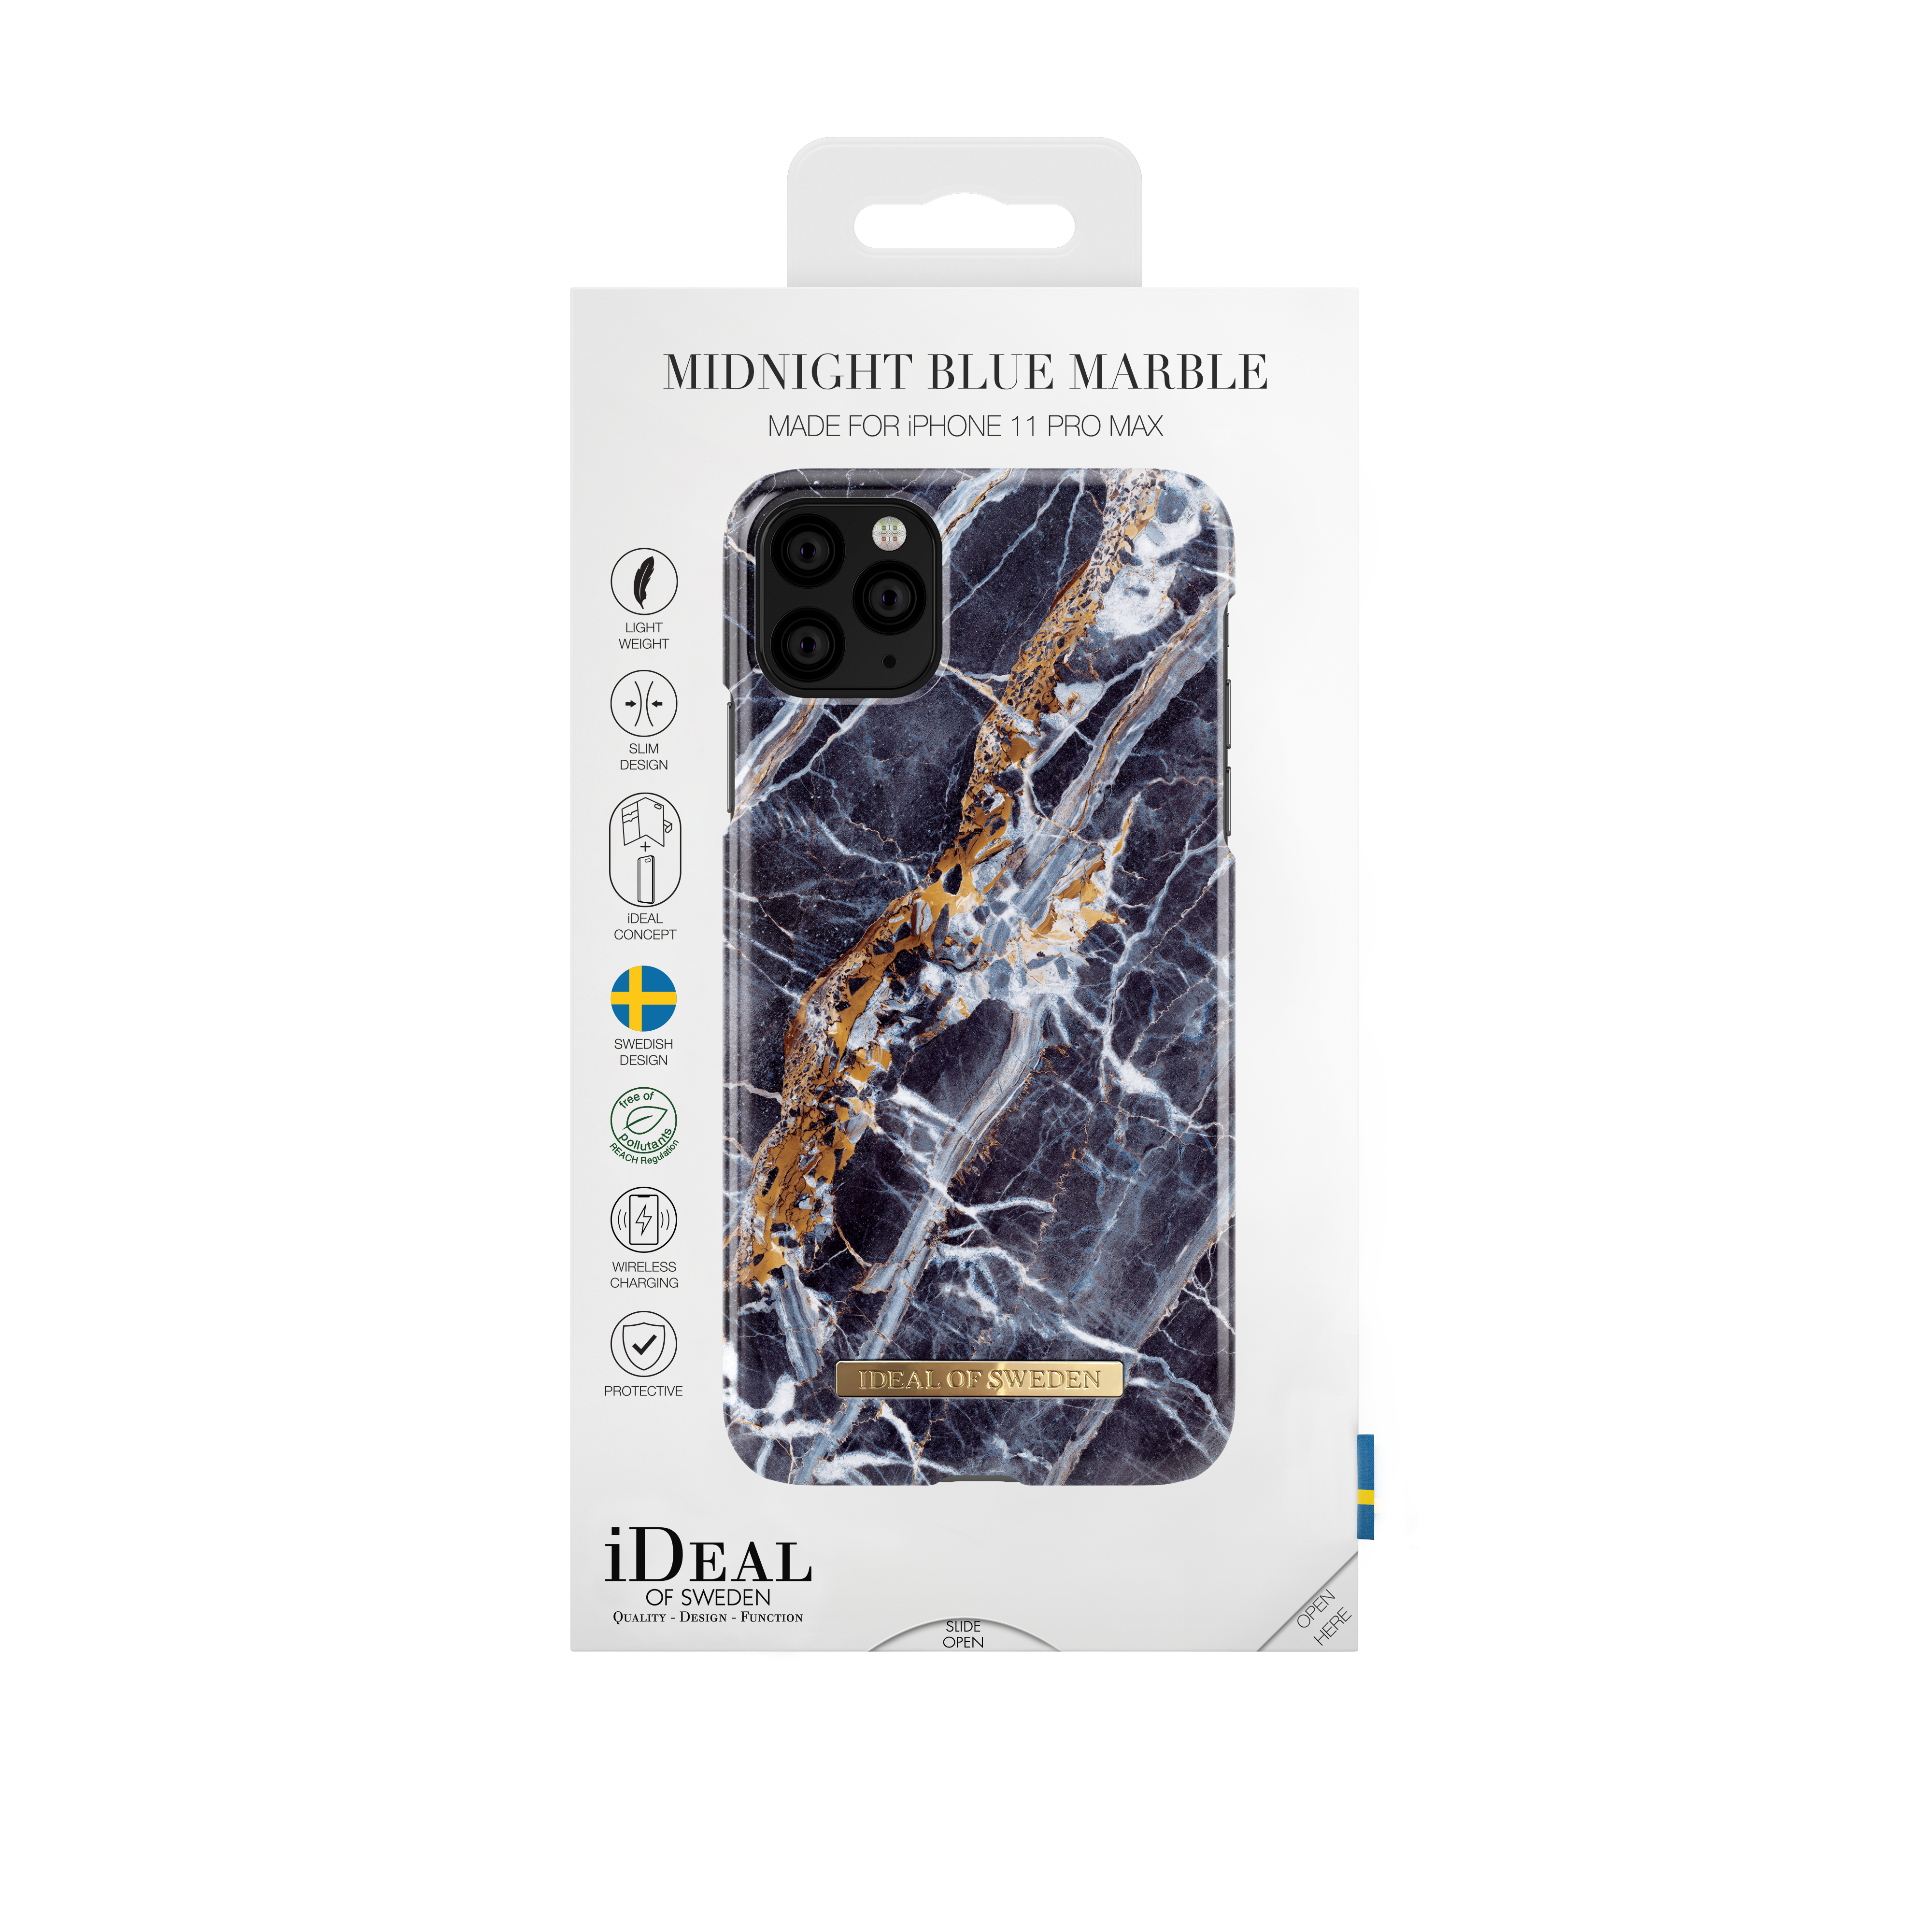 Blue Backcover, Max, Max, IDEAL OF iPhone SWEDEN Pro iPhone Marble 11 Midnight XS IDFCS17-I1965-66, Apple,